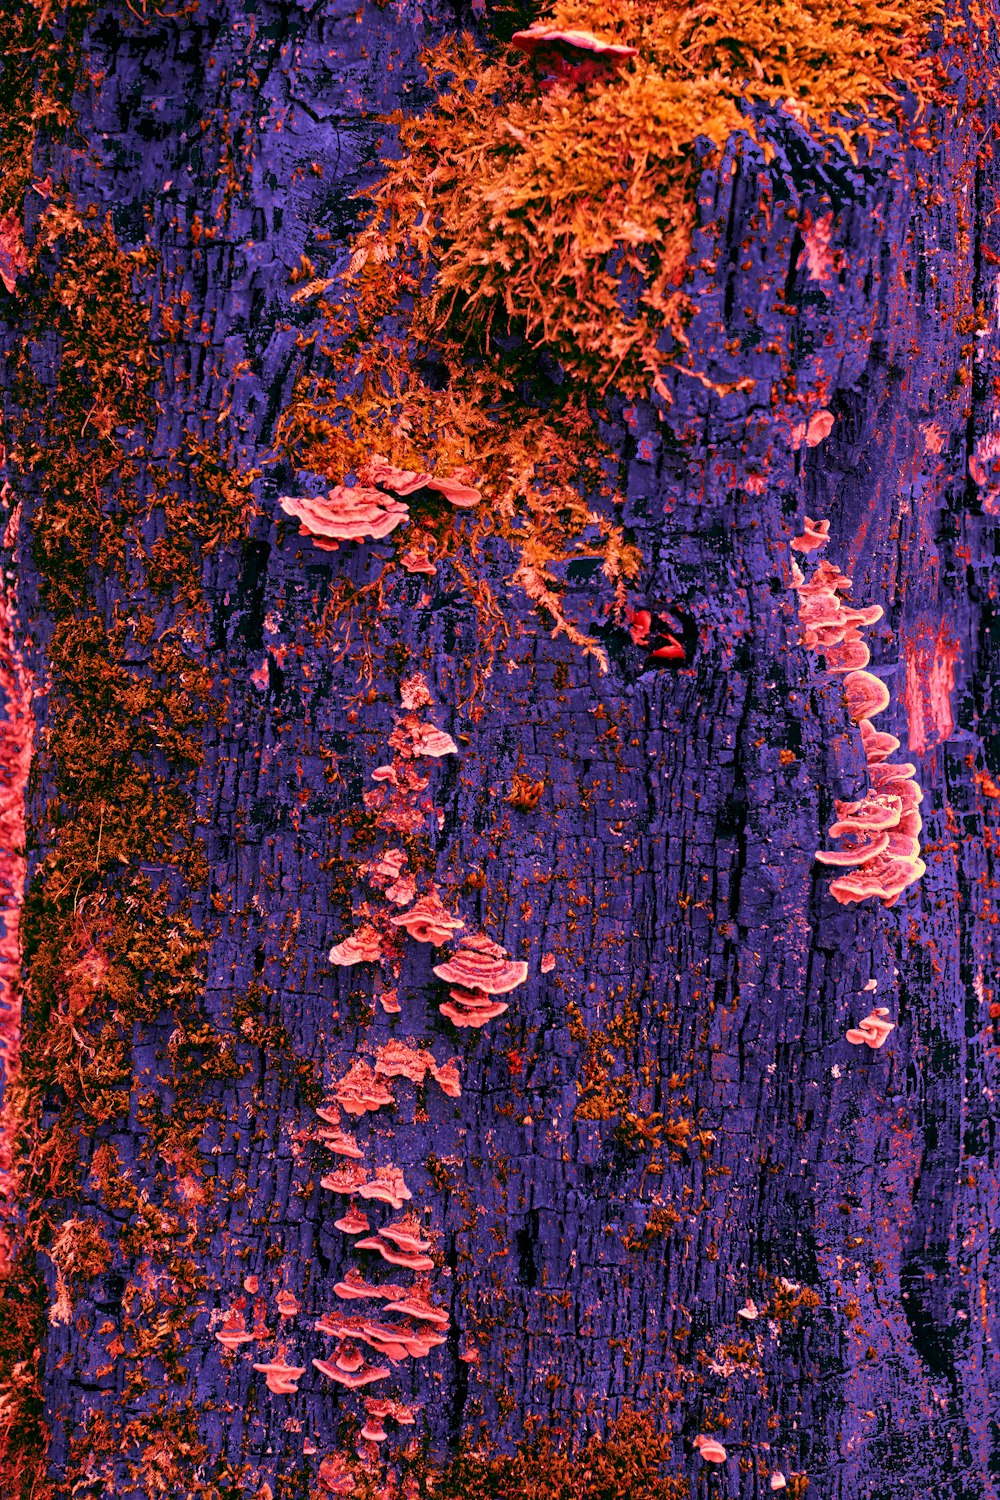 a close up of a tree trunk with lichens on it